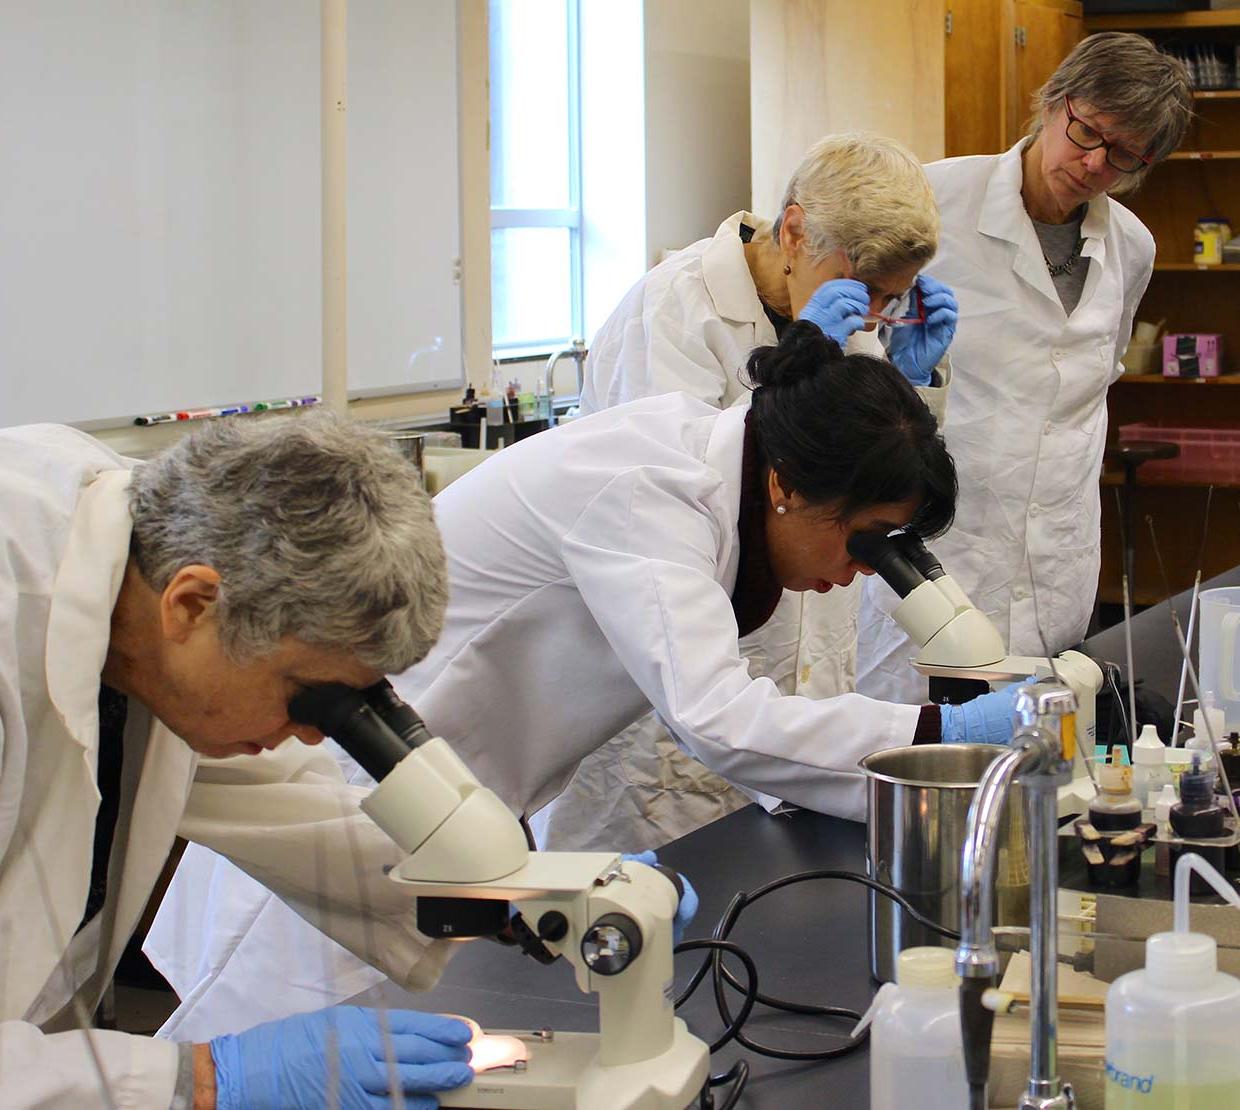 female scientists looking into microscopes in lab